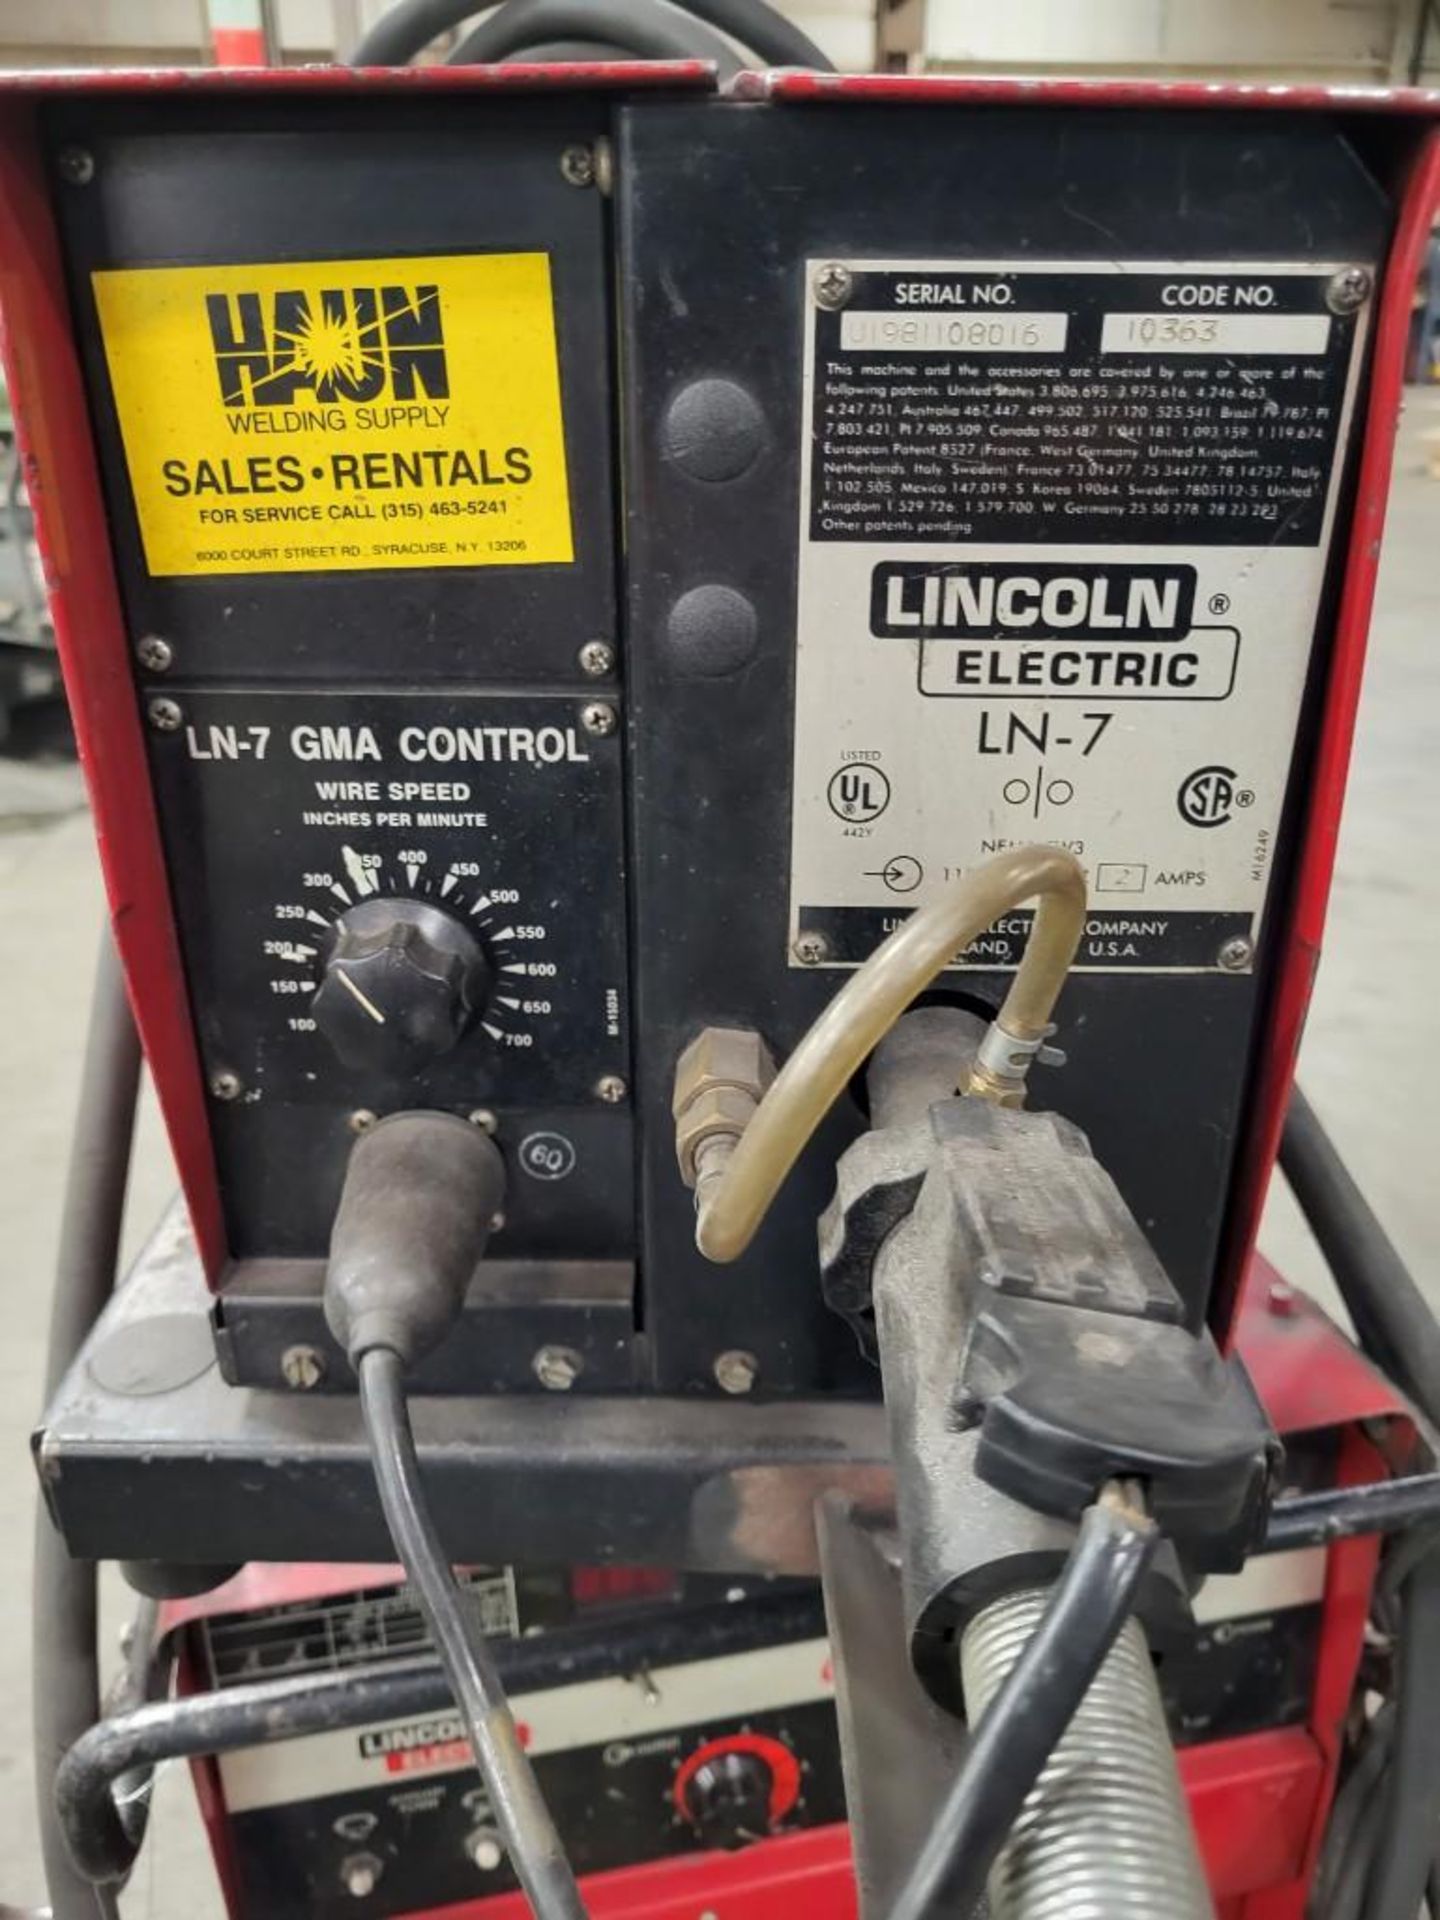 LINCOLN ELECTRIC CV-300 MIG WELDER WITH LN-7 WIRE FEEDER - Image 5 of 8